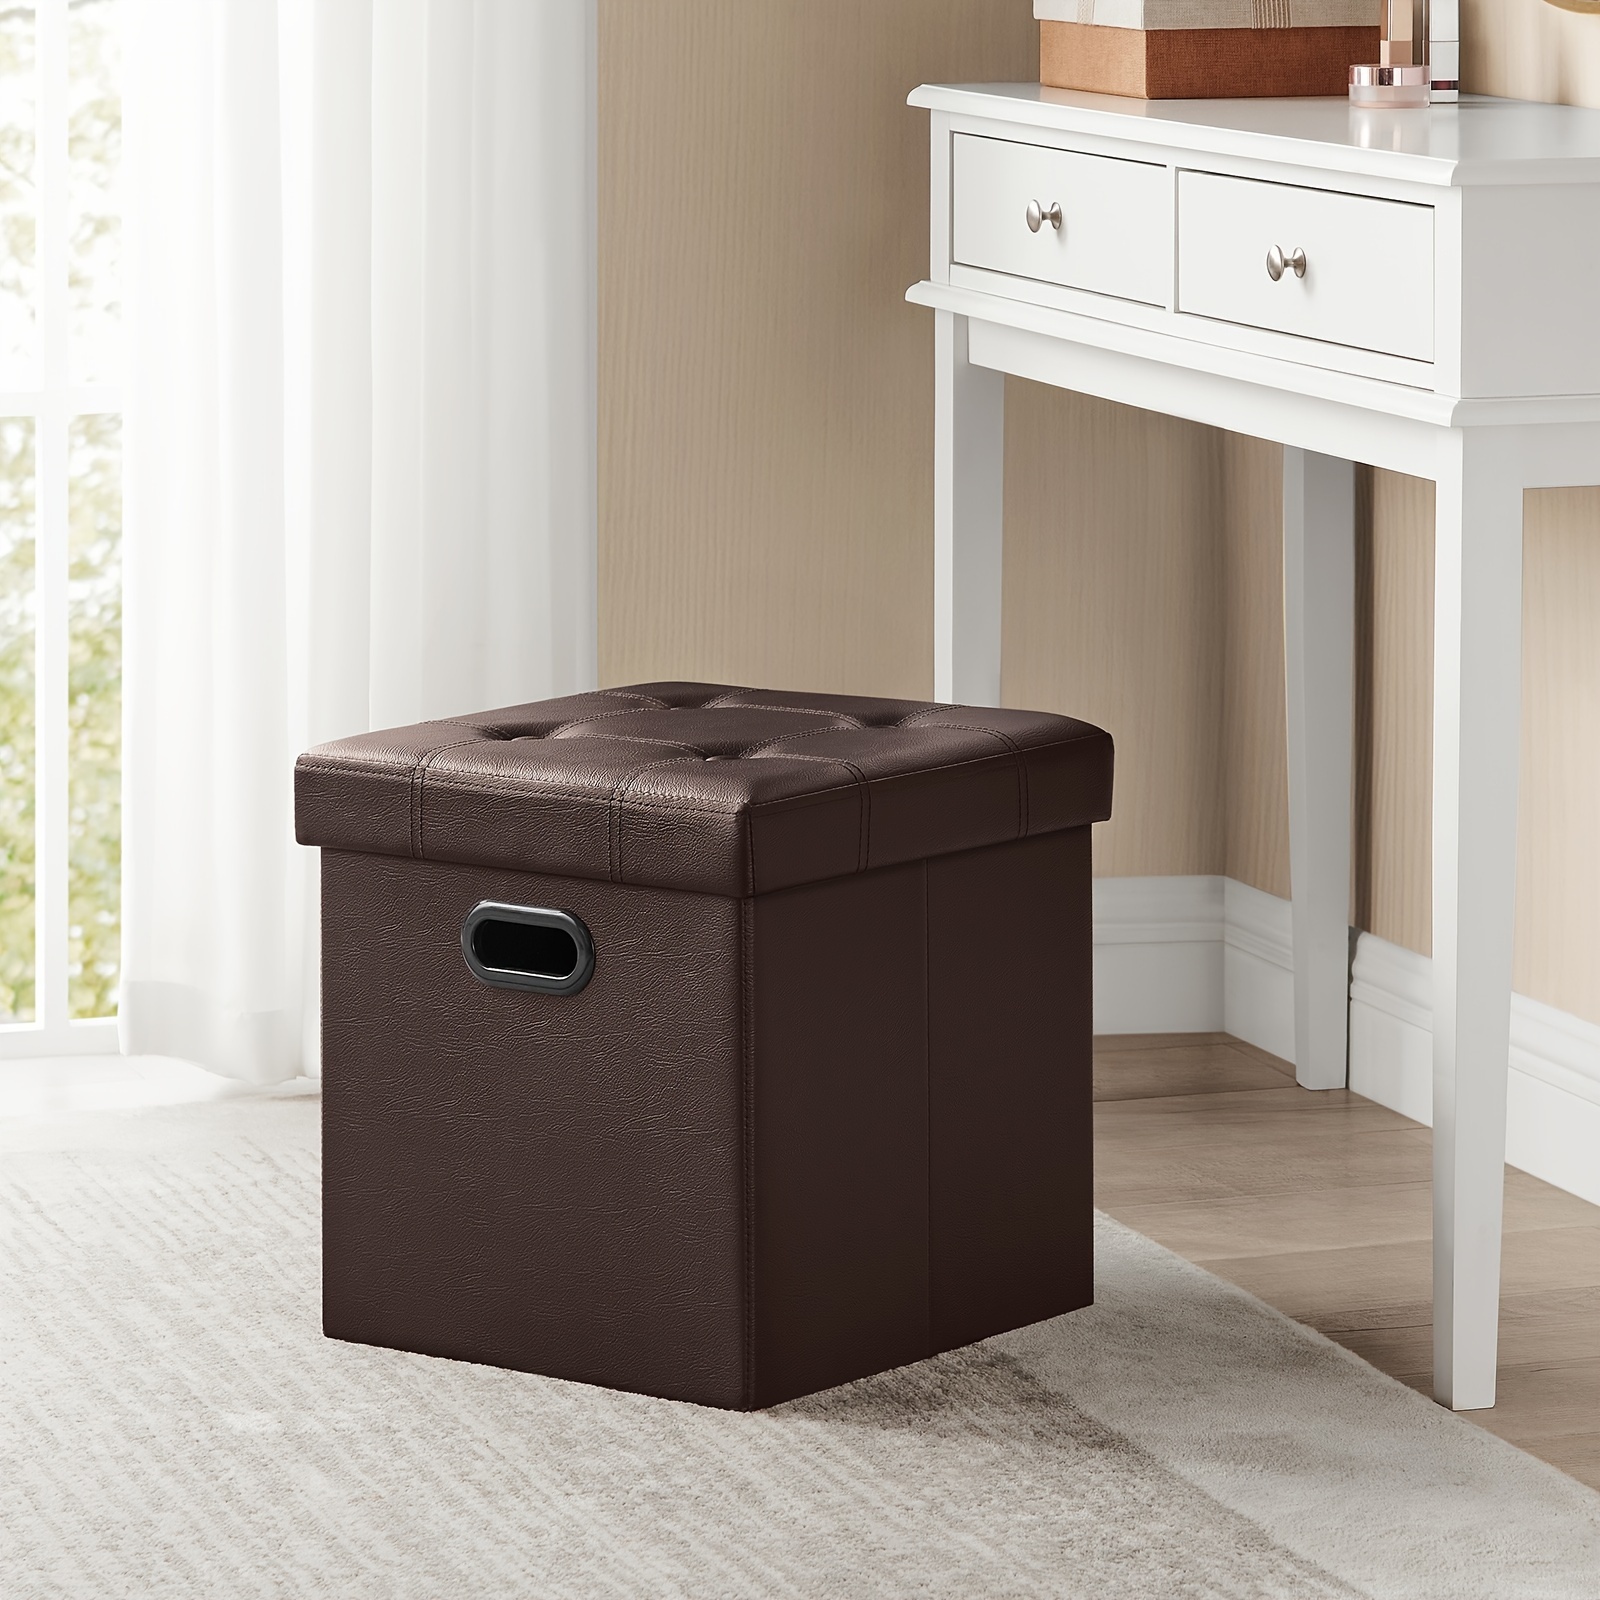 

15 Inches Ottoman With Storage, Footstool, Storage Ottoman With Metal Grommet Handles, Synthetic Leather, 660 Lb Load Capacity, For Dorm Room, Living Room, Bedroom, Brown